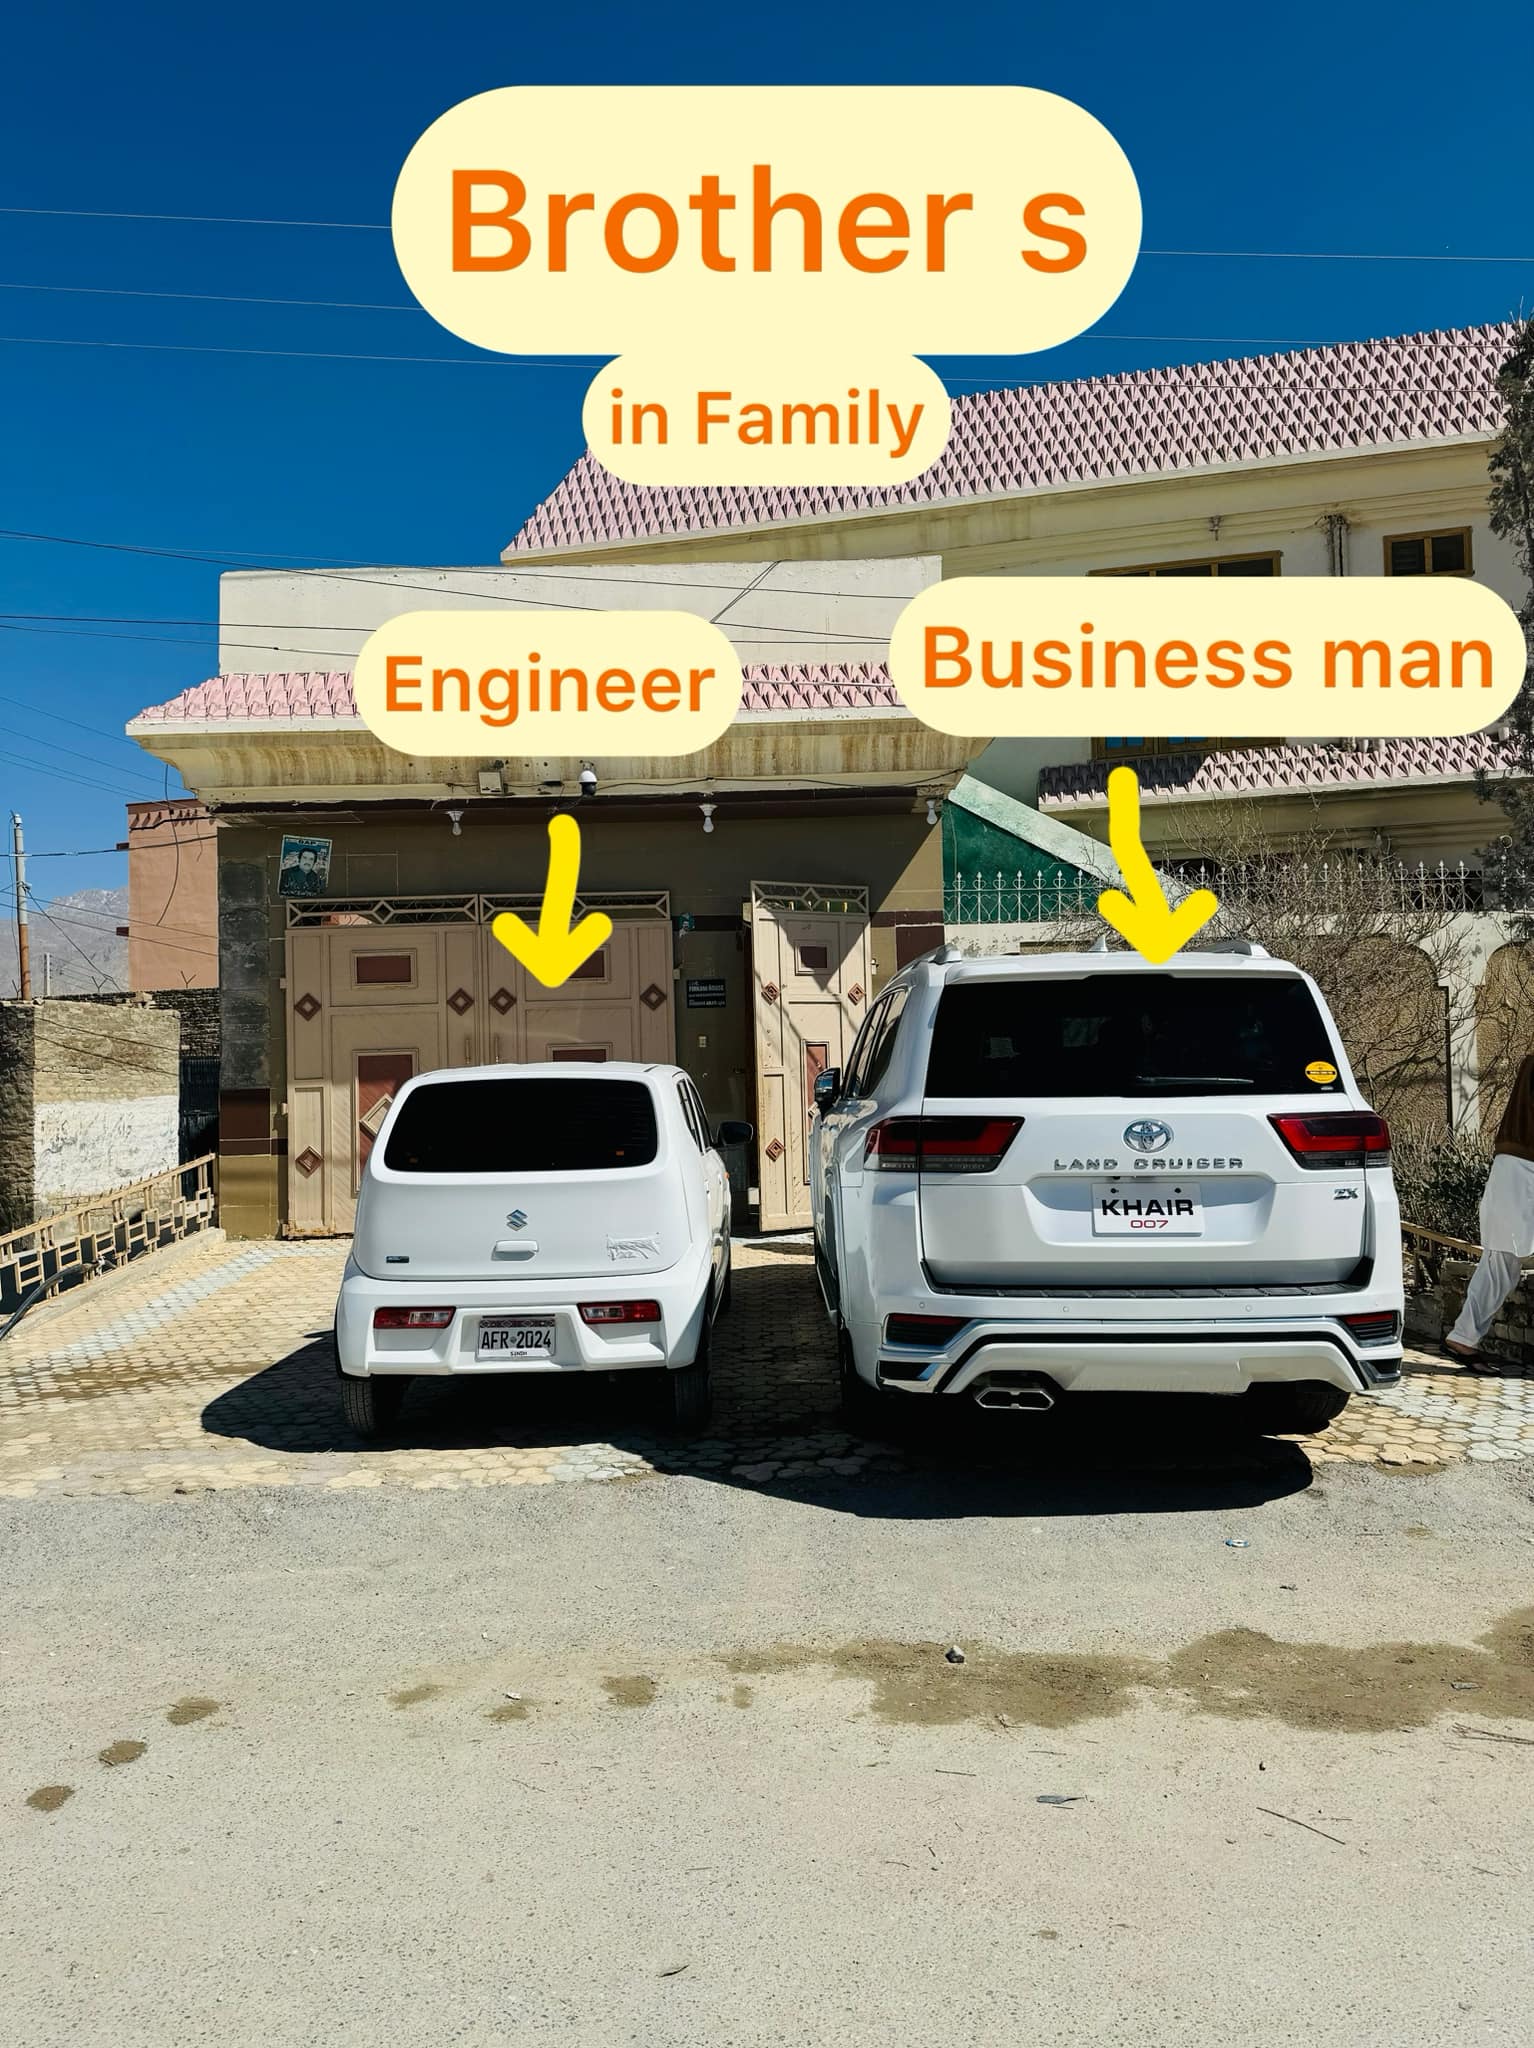 When same faimly borthers one Engineer and other BUsiness man